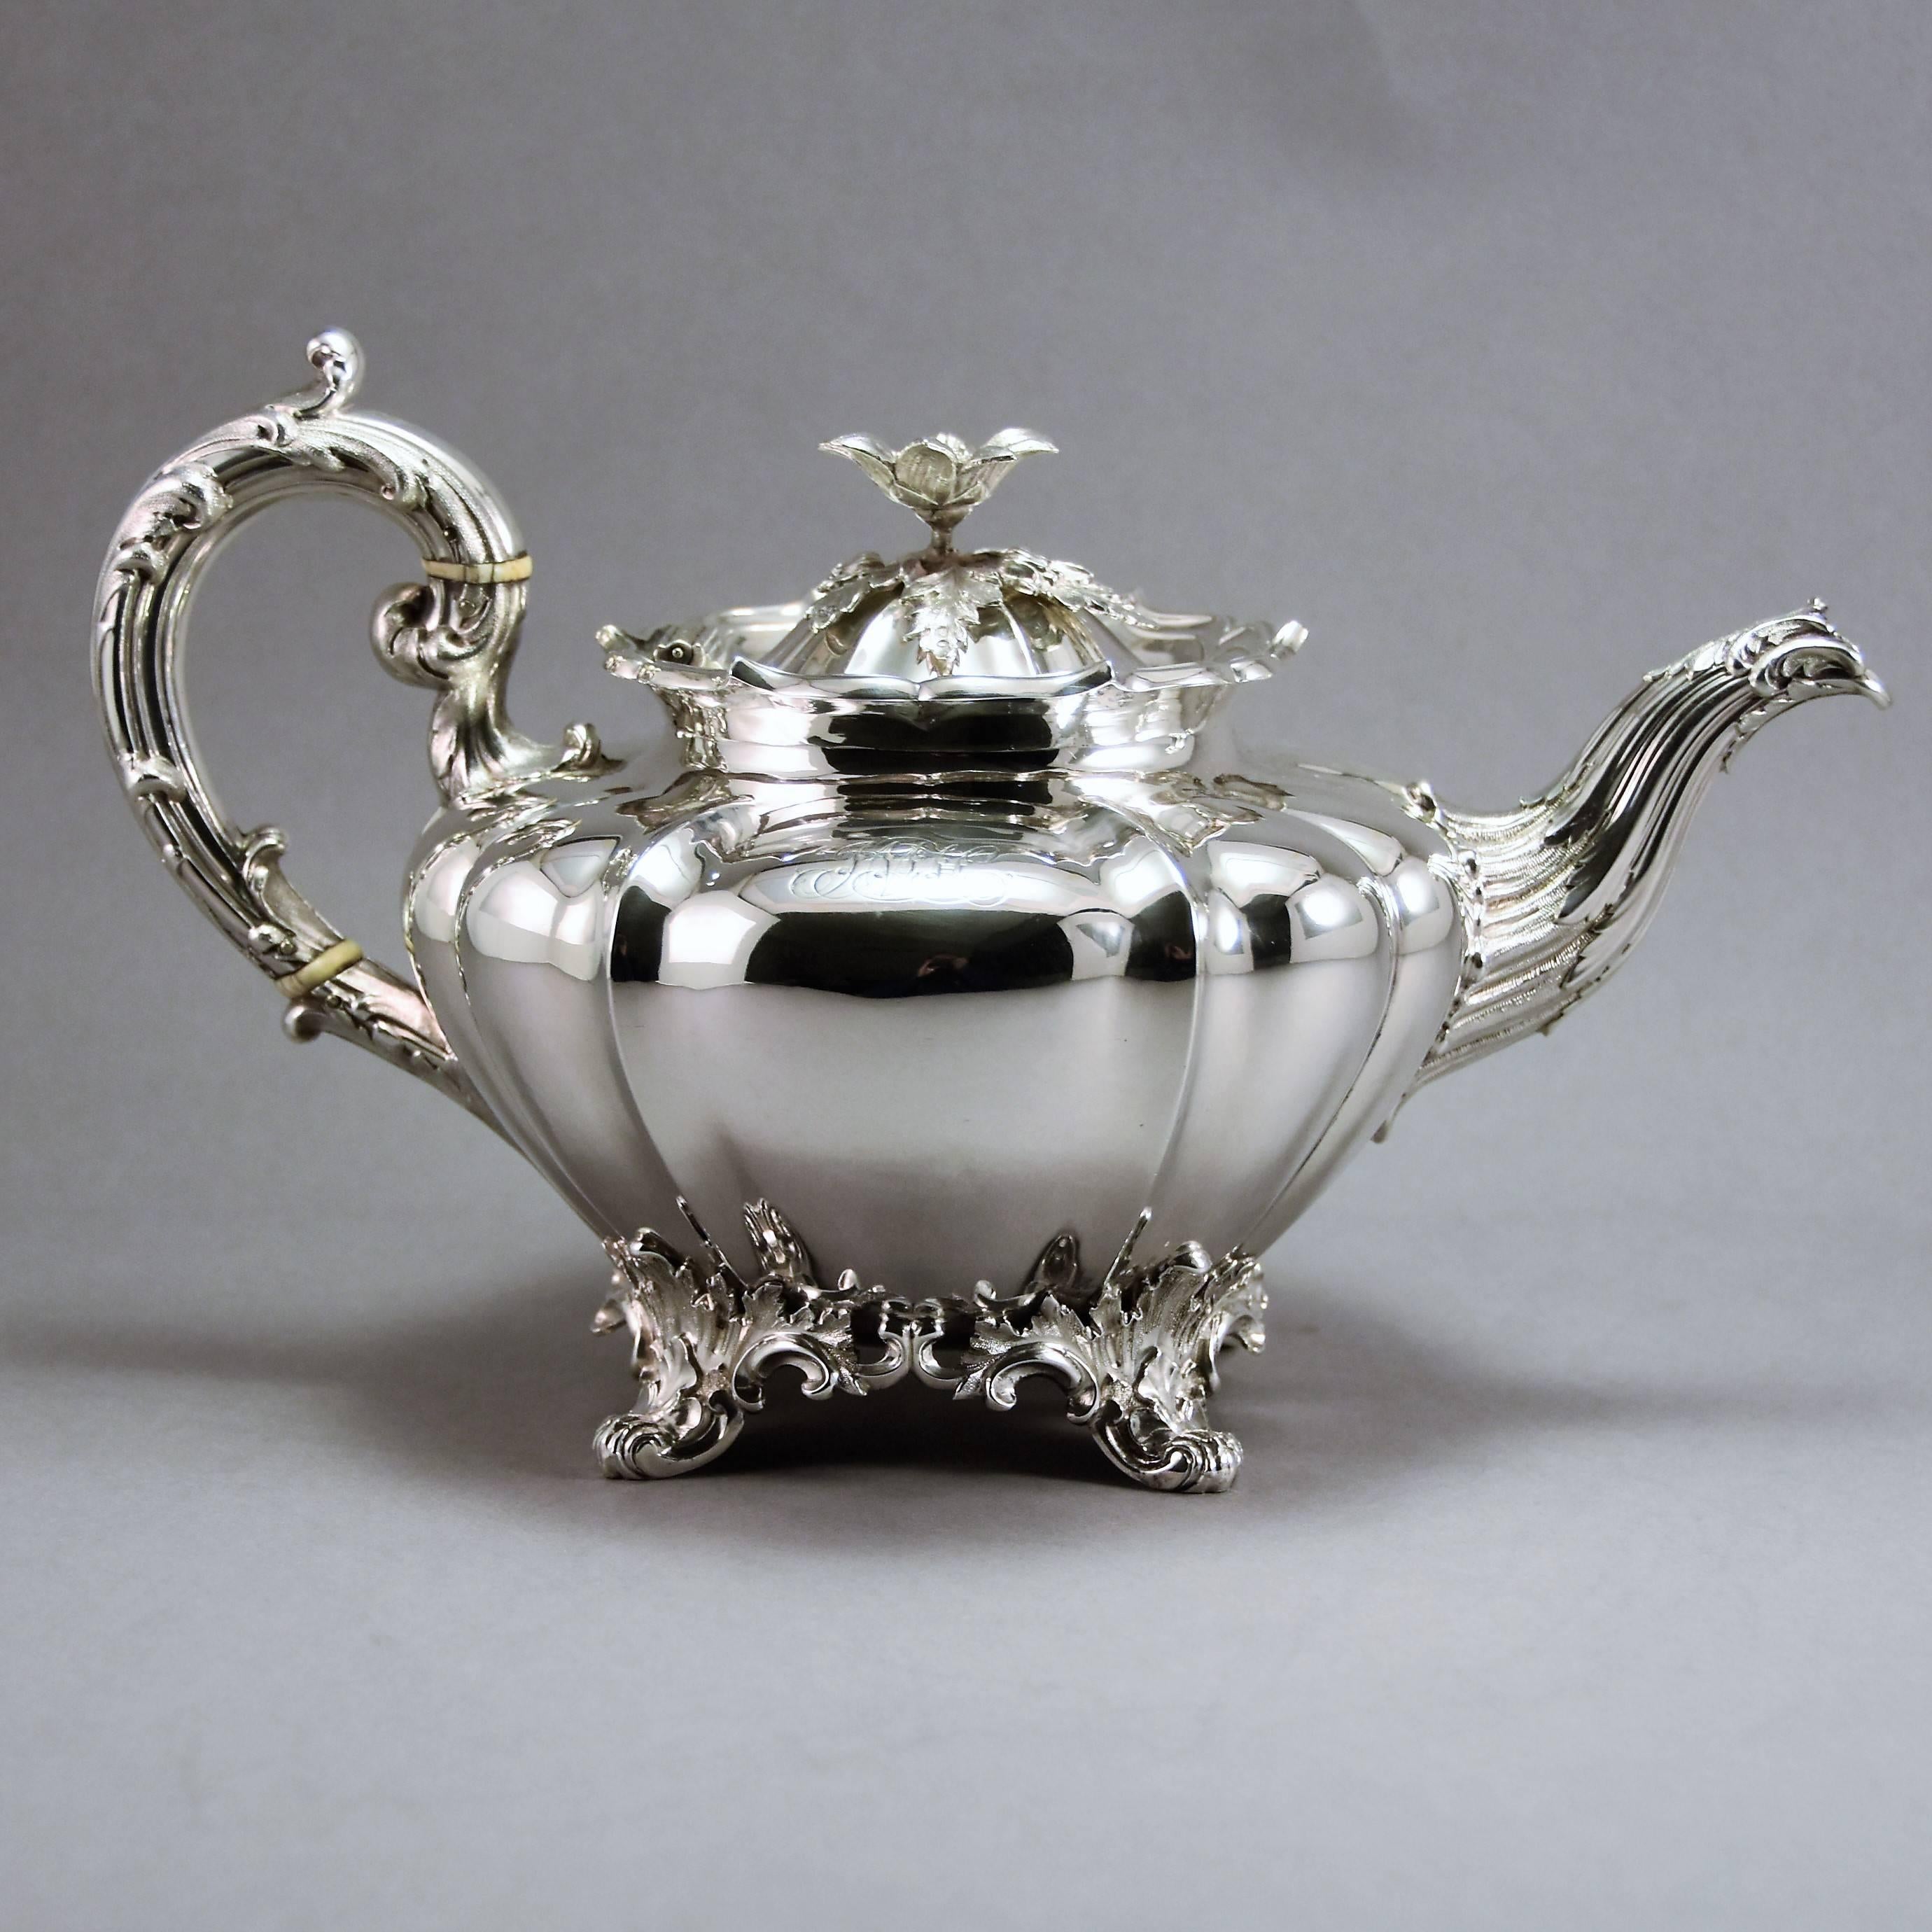 A superb quality, four piece, William IV sterling silver tea set made in London by the Barnards family fully hallmarked and dated 1836

Lobed circular bellied form, leaf capped scroll handles with insulators, the hinged covers with flower finial, on